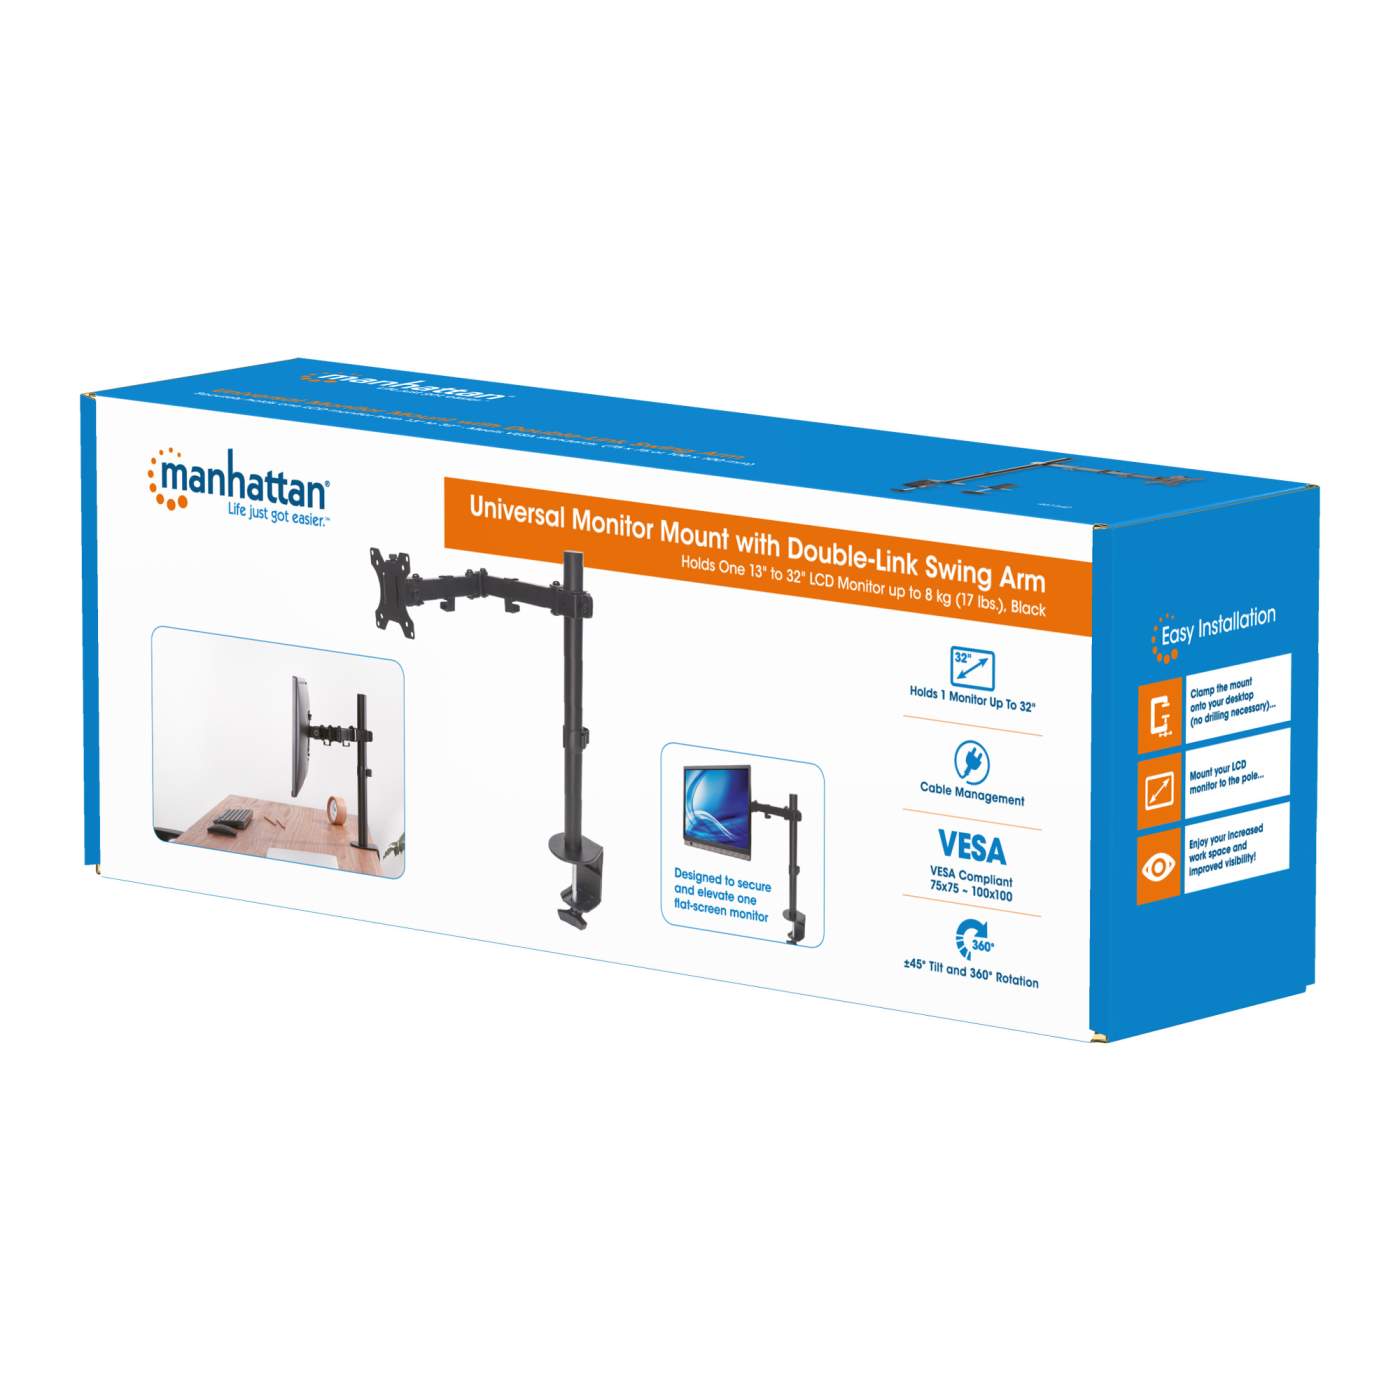 Universal Monitor Mount with Double-Link Swing Arm Packaging Image 2